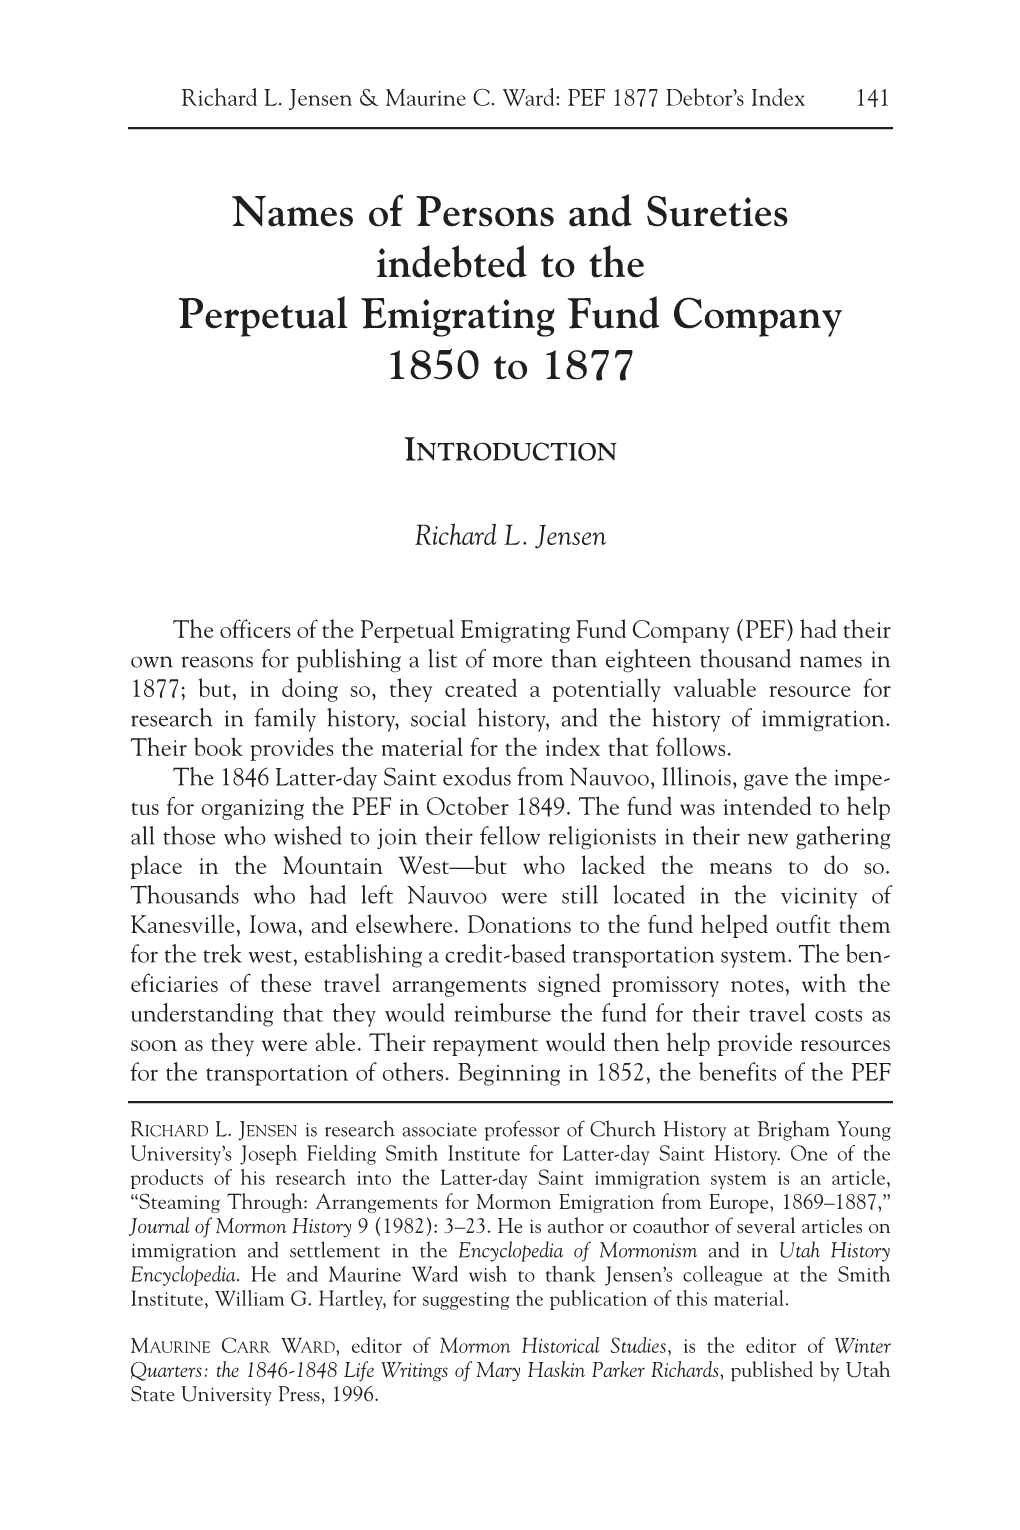 Names of Persons and Sureties Indebted to the Perpetual Emigrating Fund Company 1850 to 1877